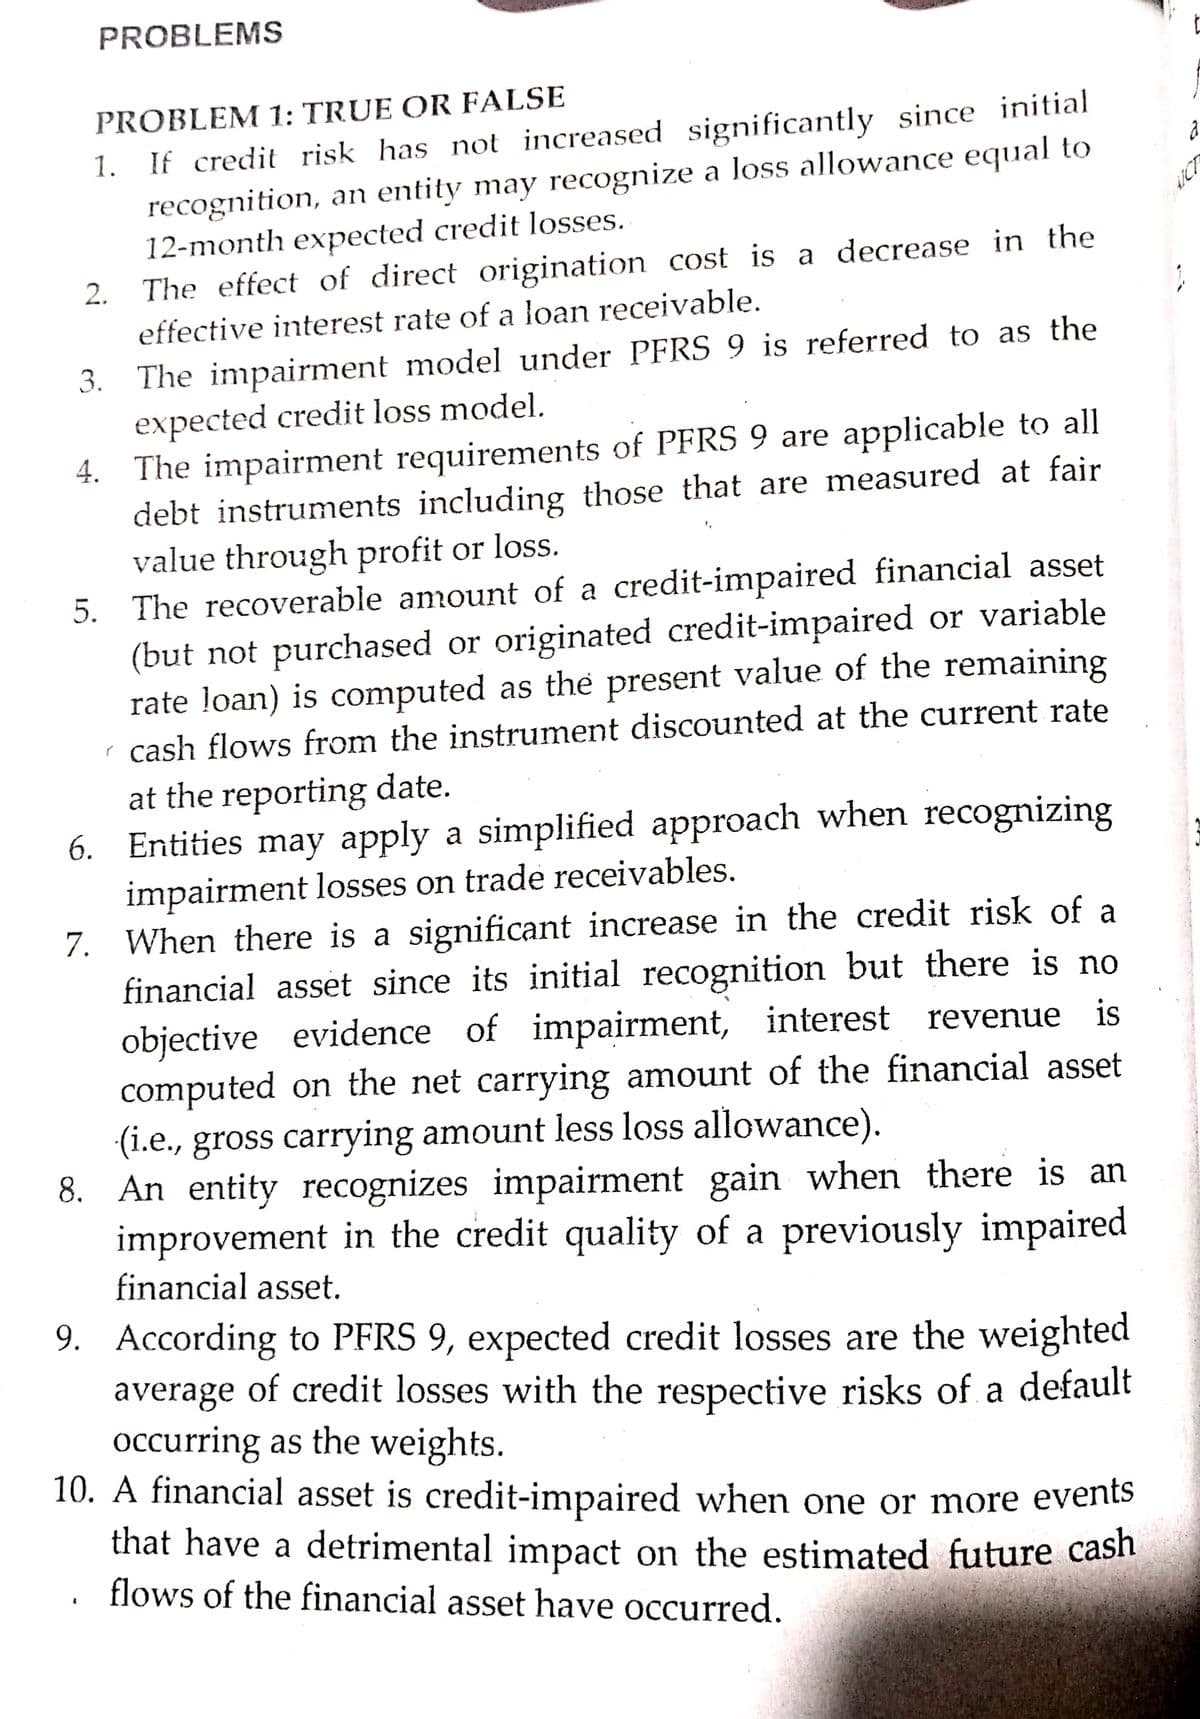 PROBLEMS
PROBLEM 1: TRUE OR FALSE
1. If credit risk has not increased significantly since initial
recognition, an entity may recognize a loss allowance equal to
12-month expected credit losses.
2. The effect of direct origination cost is a decrease in the
effective interest rate of a loan receivable.
3. The impairment model under PFRS 9 is referred to as the
expected credit loss model.
4. The impairment requirements of PFRS 9 are applicable to all
debt instruments including those that are measured at fair
value through profit or loss.
5. The recoverable amount of a credit-impaired financial asset
(but not purchased or originated credit-impaired or variable
rate loan) is computed as the present value of the remaining
r cash flows from the instrument discounted at the current rate
at the reporting date.
6. Entities may apply a simplified approach when recognizing
impairment losses on trade receivables.
7. When there is a significant increase in the credit risk of a
financial asset since its initial recognition but there is no
objective evidence of impairment, interest revenue is
computed on the net carrying amount of the financial asset
(i.e., gross carrying amount less loss allowance).
8. An entity recognizes impairment gain when there is an
improvement in the credit quality of a previously impaired
financial asset.
9. According to PFRS 9, expected credit losses are the weighted
average of credit losses with the respective risks of a default
Occurring as the weights.
10. A financial asset is credit-impaired when one or more events
that have a detrimental impact on the estimated future cash
flows of the financial asset have occurred.
